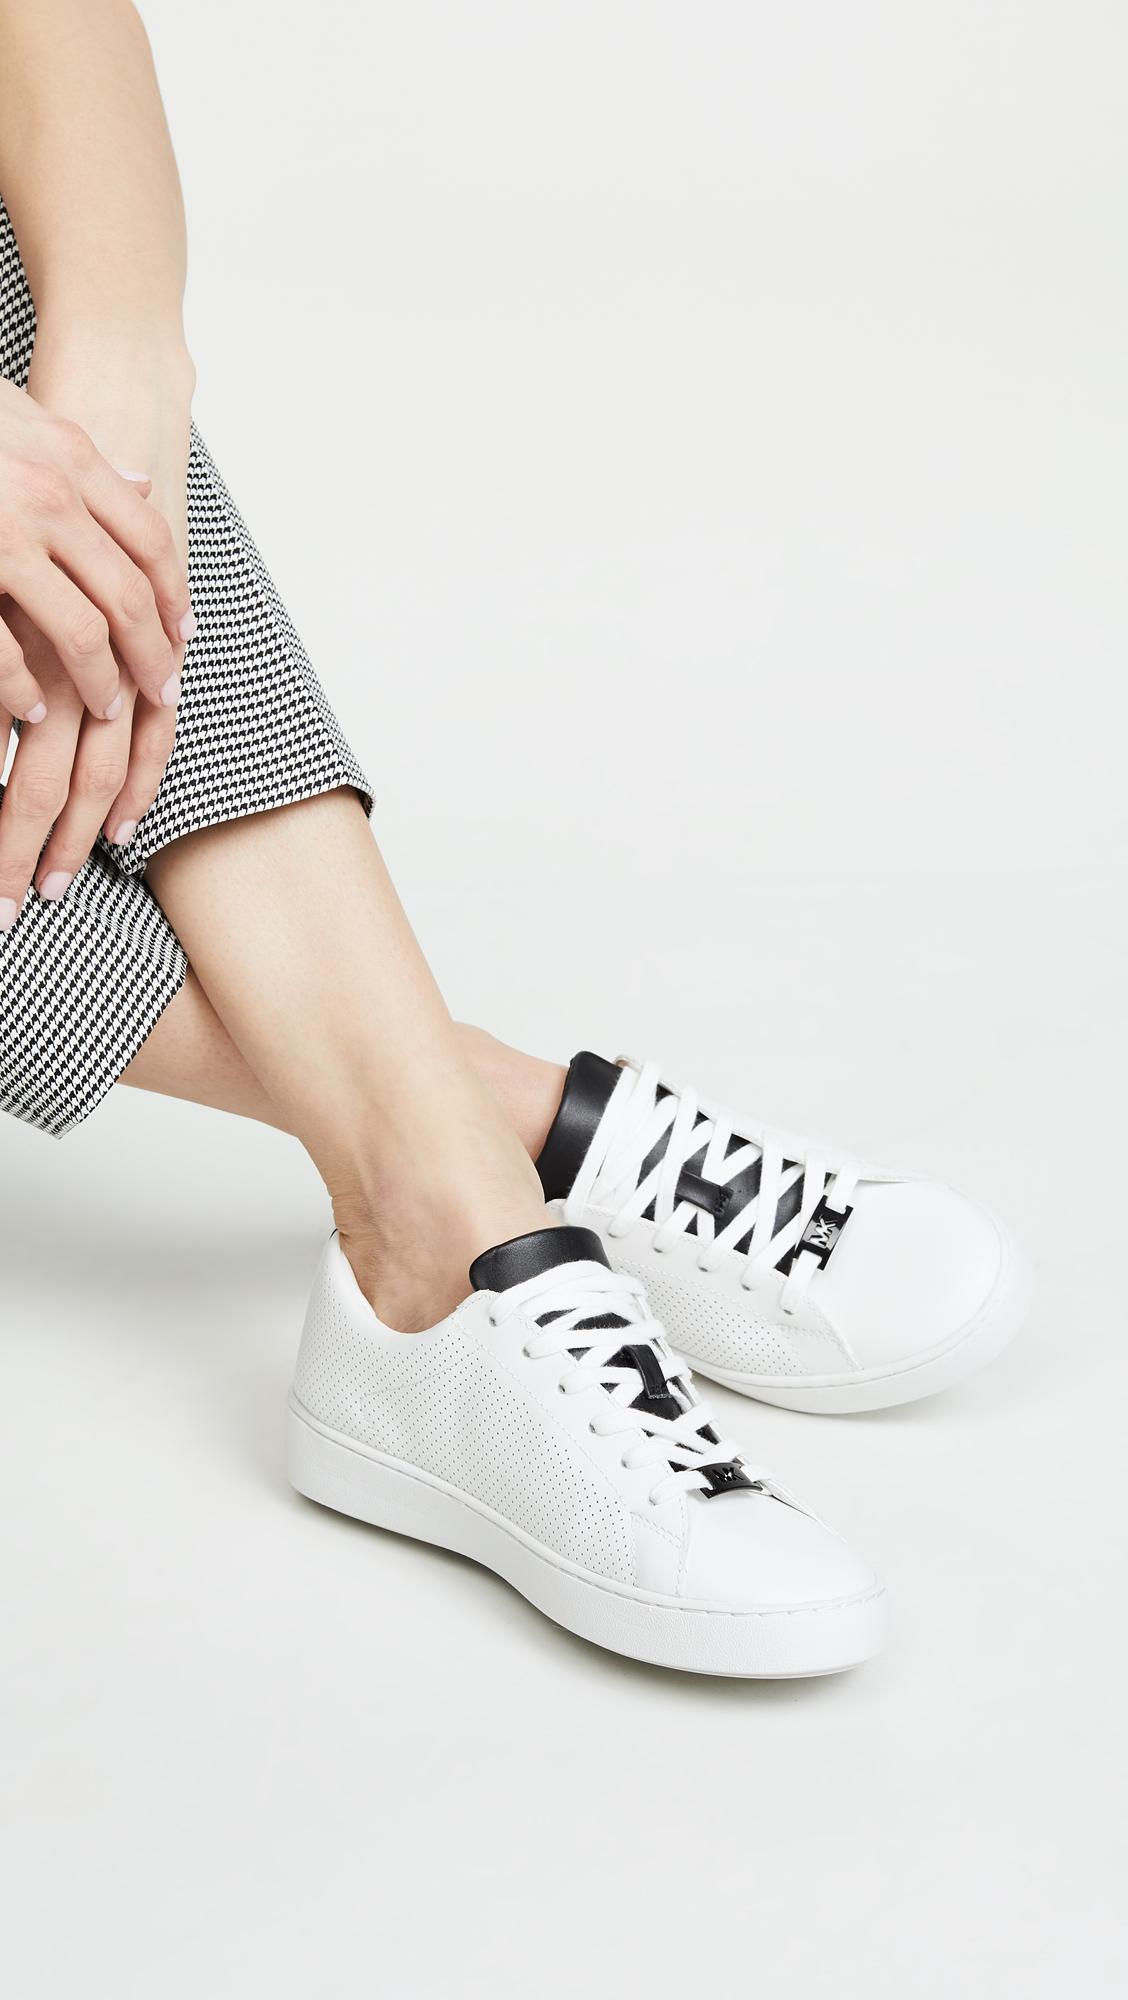 Michael Kors Up Sneakers in White |